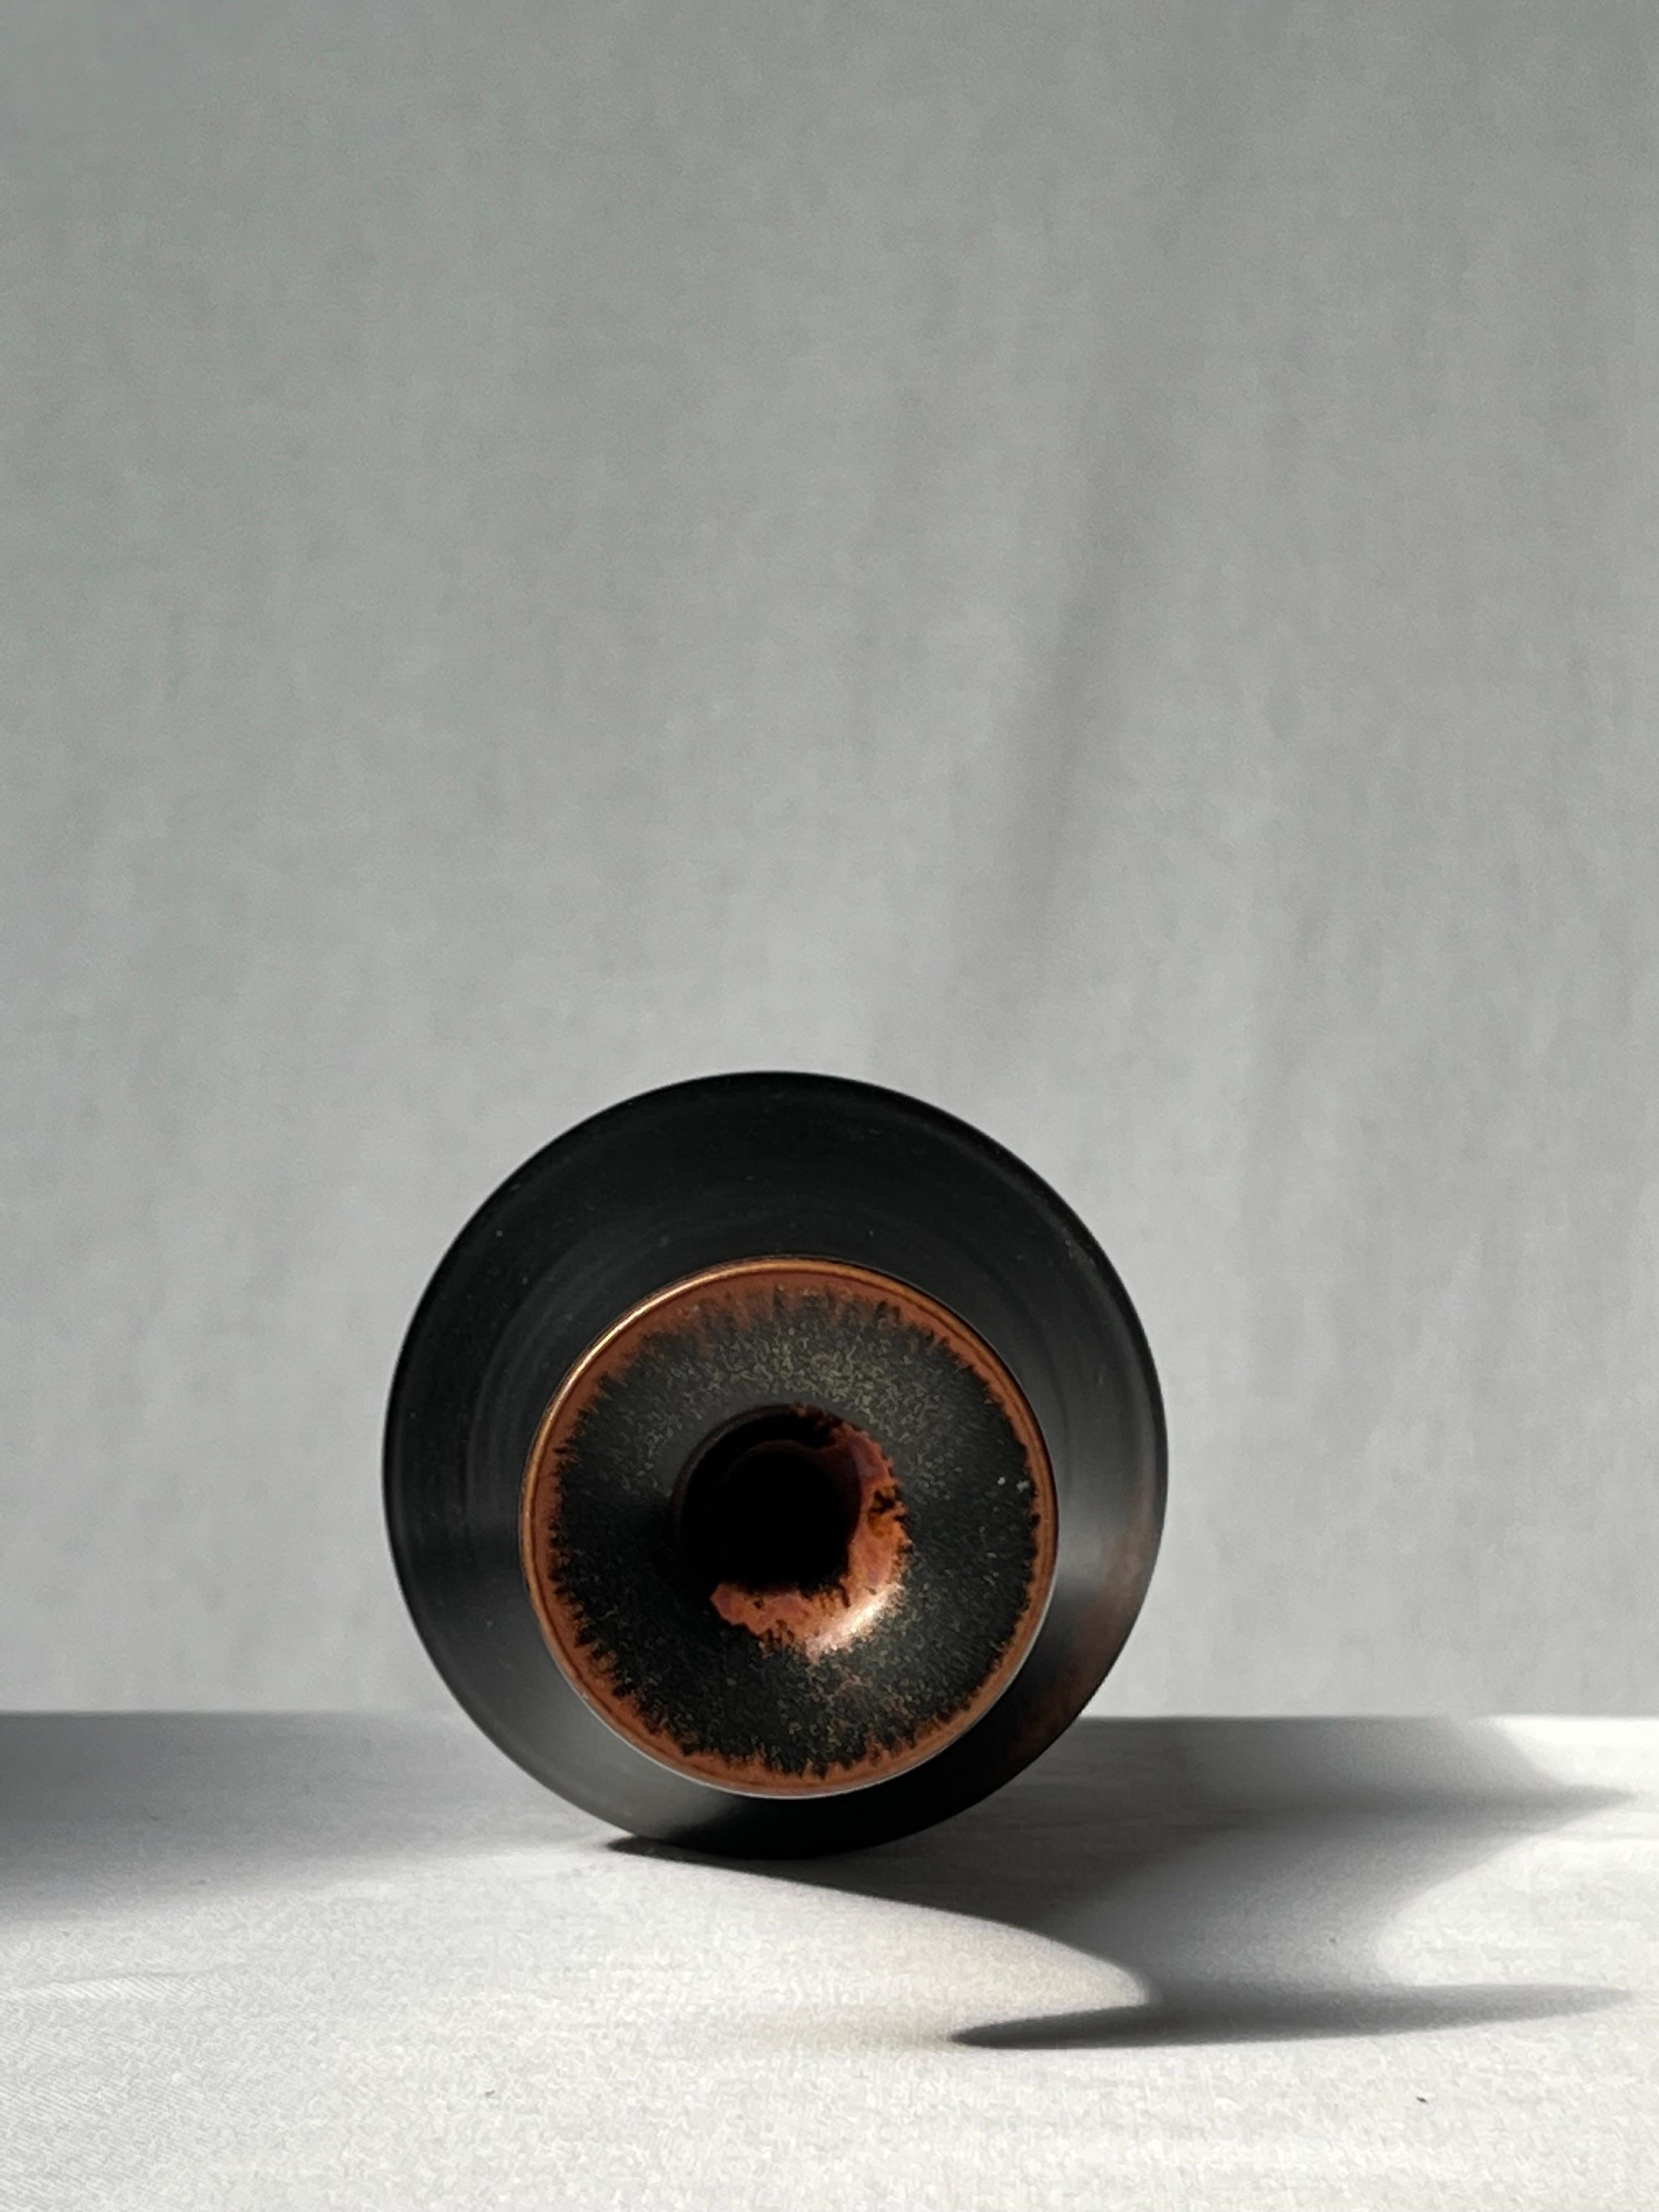 Stig Lindberg Unique Vase in black Glaze Tenmoku Made by Hand Sweden 1969 In Excellent Condition For Sale In Forest, BE